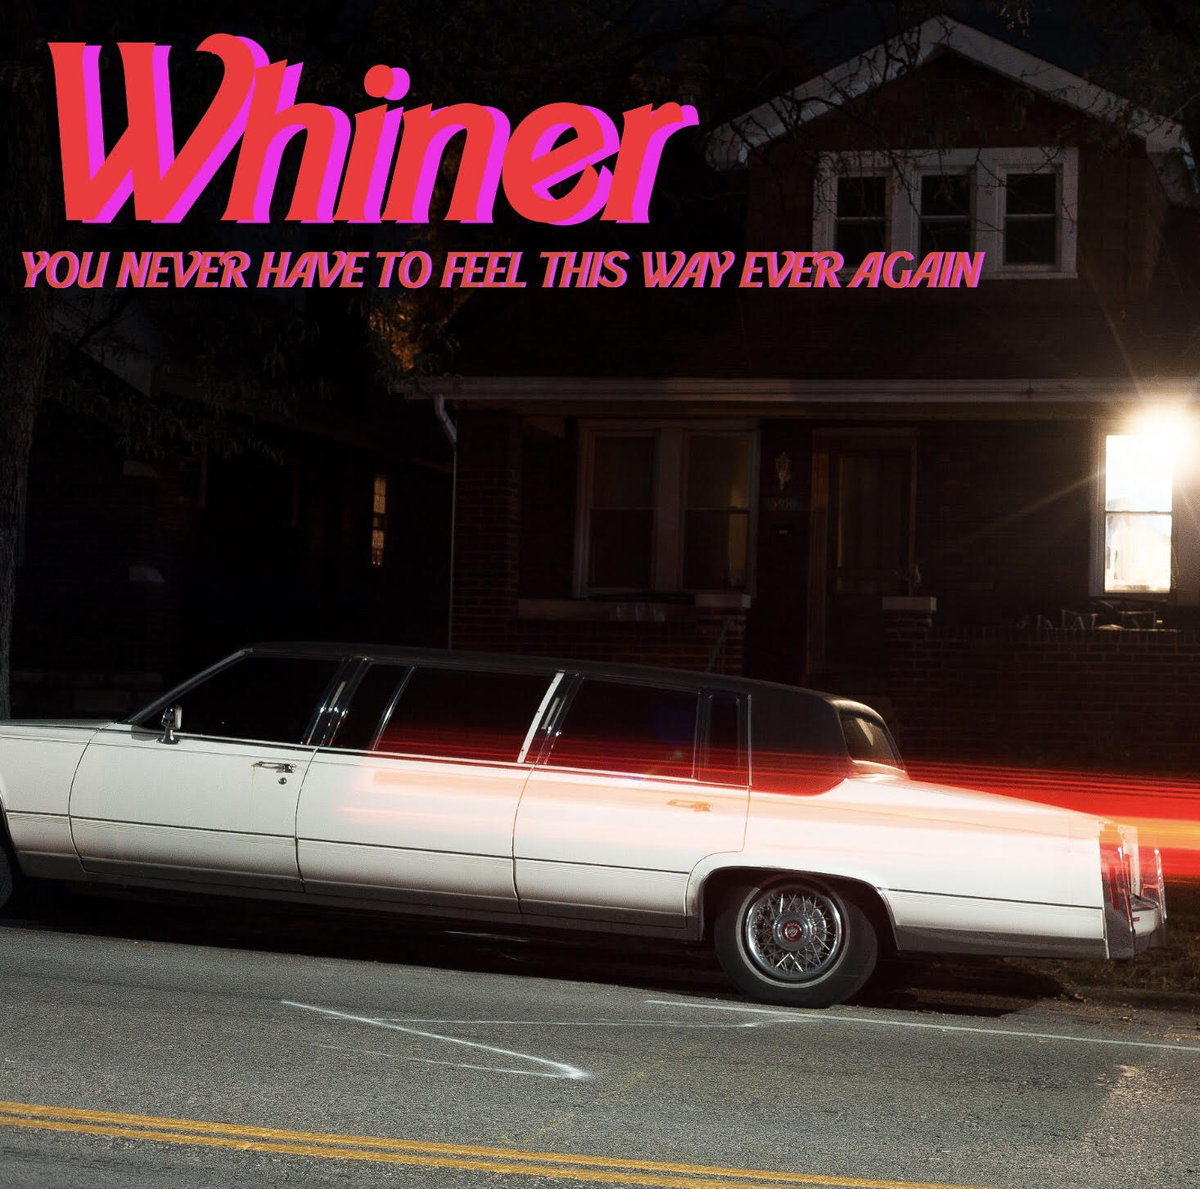 Whiner cover